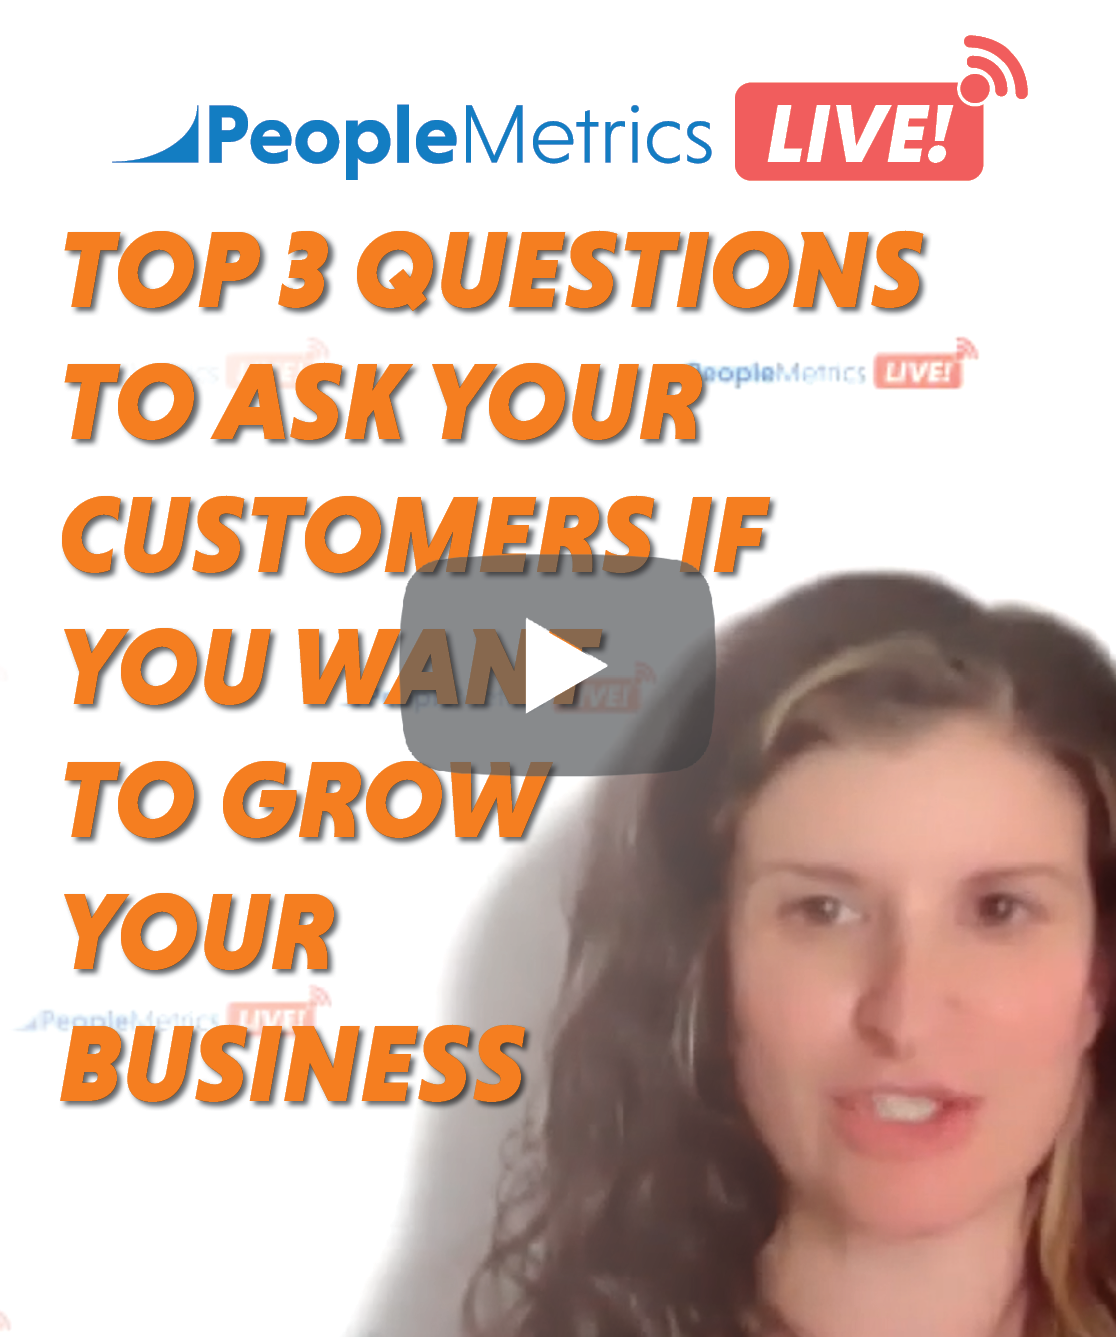 PeopleMetrics LIVE! | What Are The Best Voice of the Customer (VoC) Alerts? How Do You Use Them?